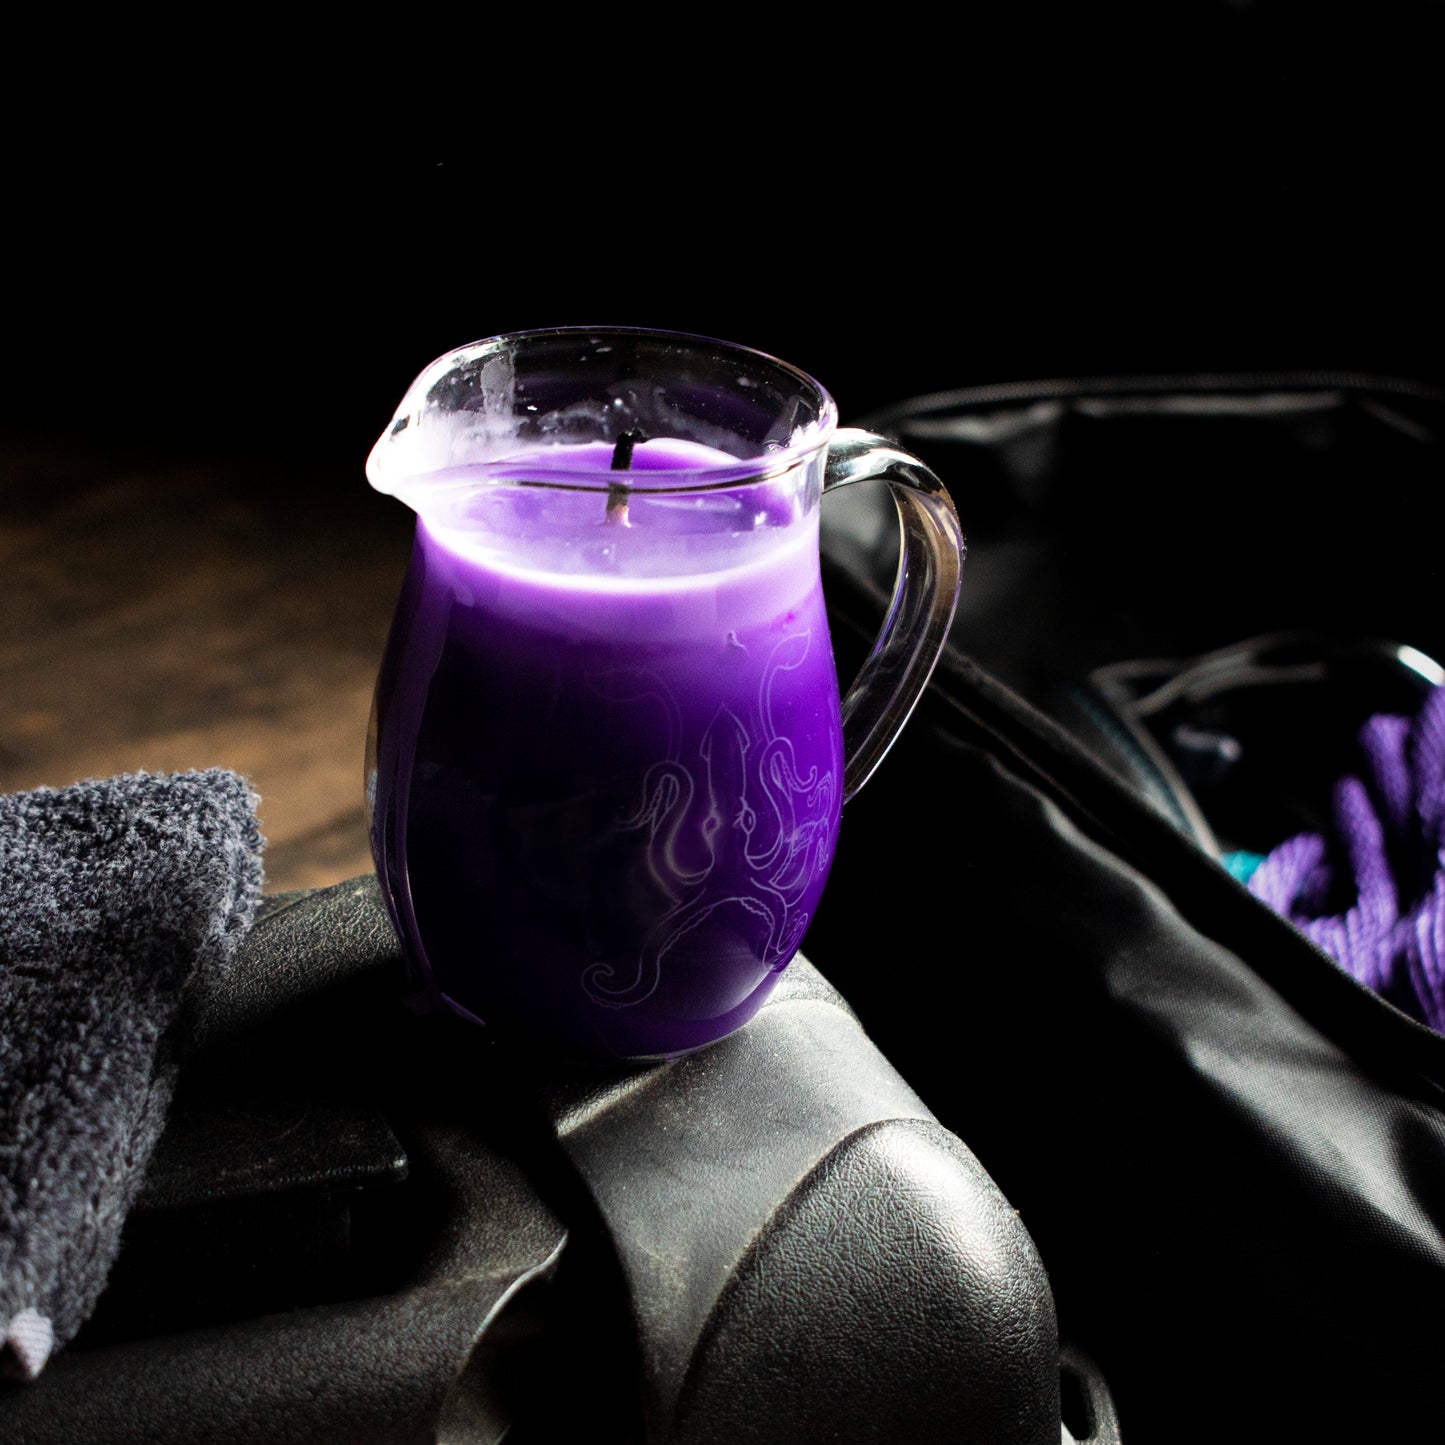 Classic Wax Play Pitcher Candle - Lav temperatur - Uparfymert - Parafin